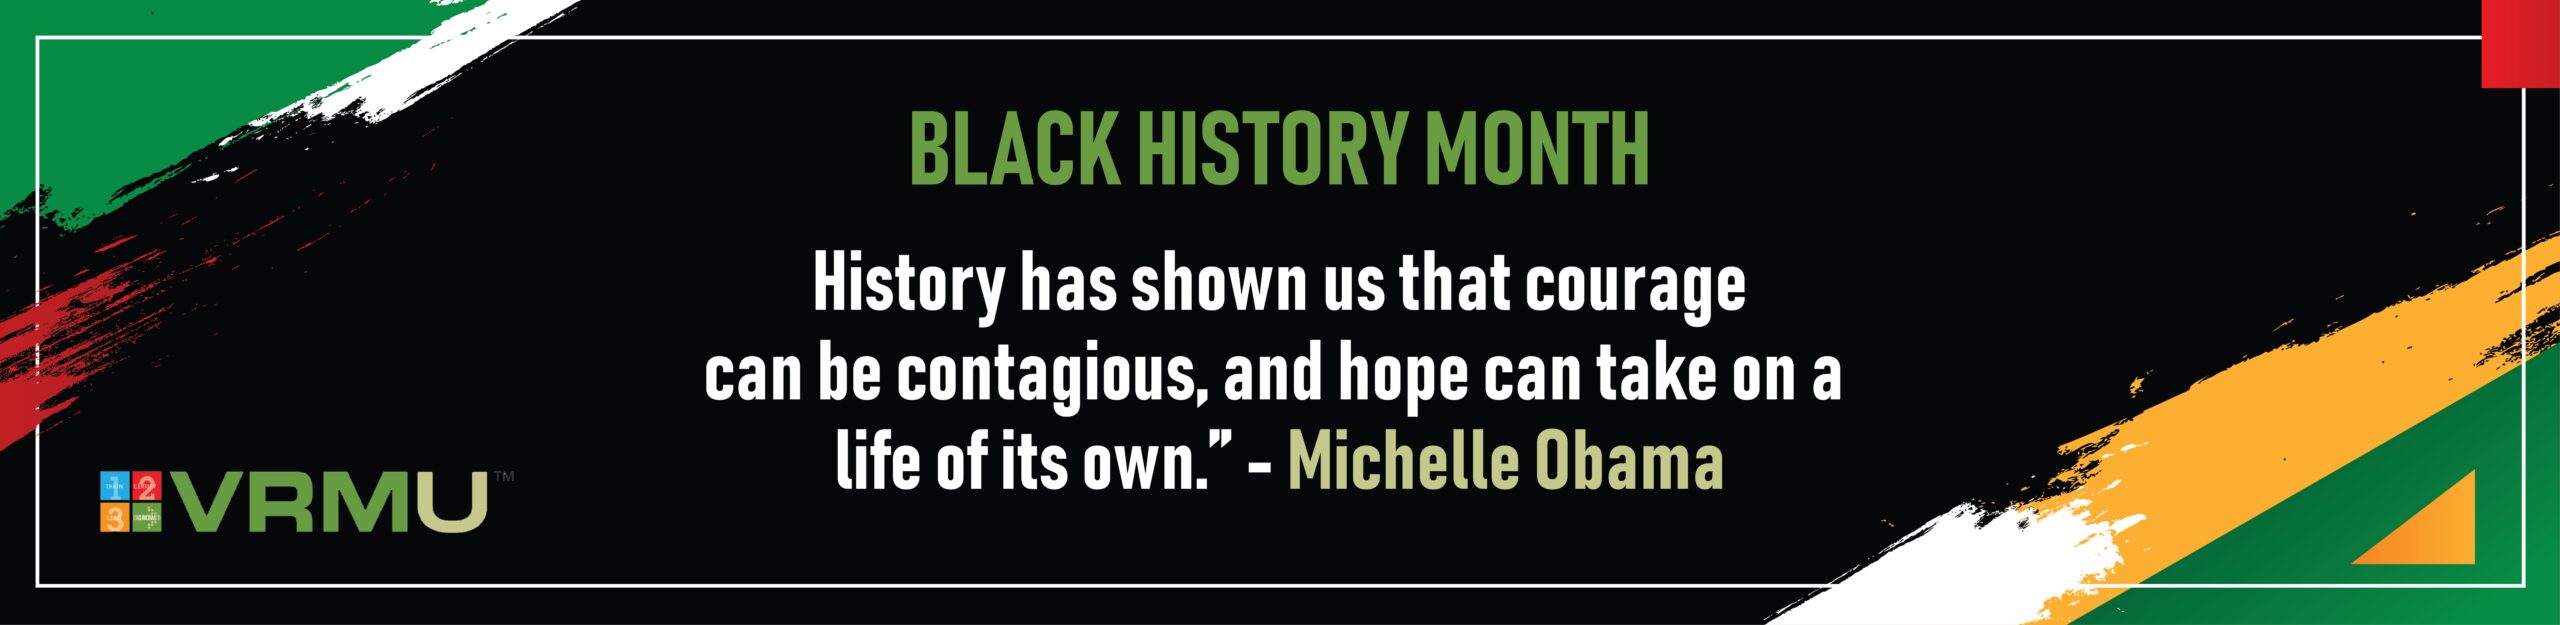 Black history month quote from Michelle Obama